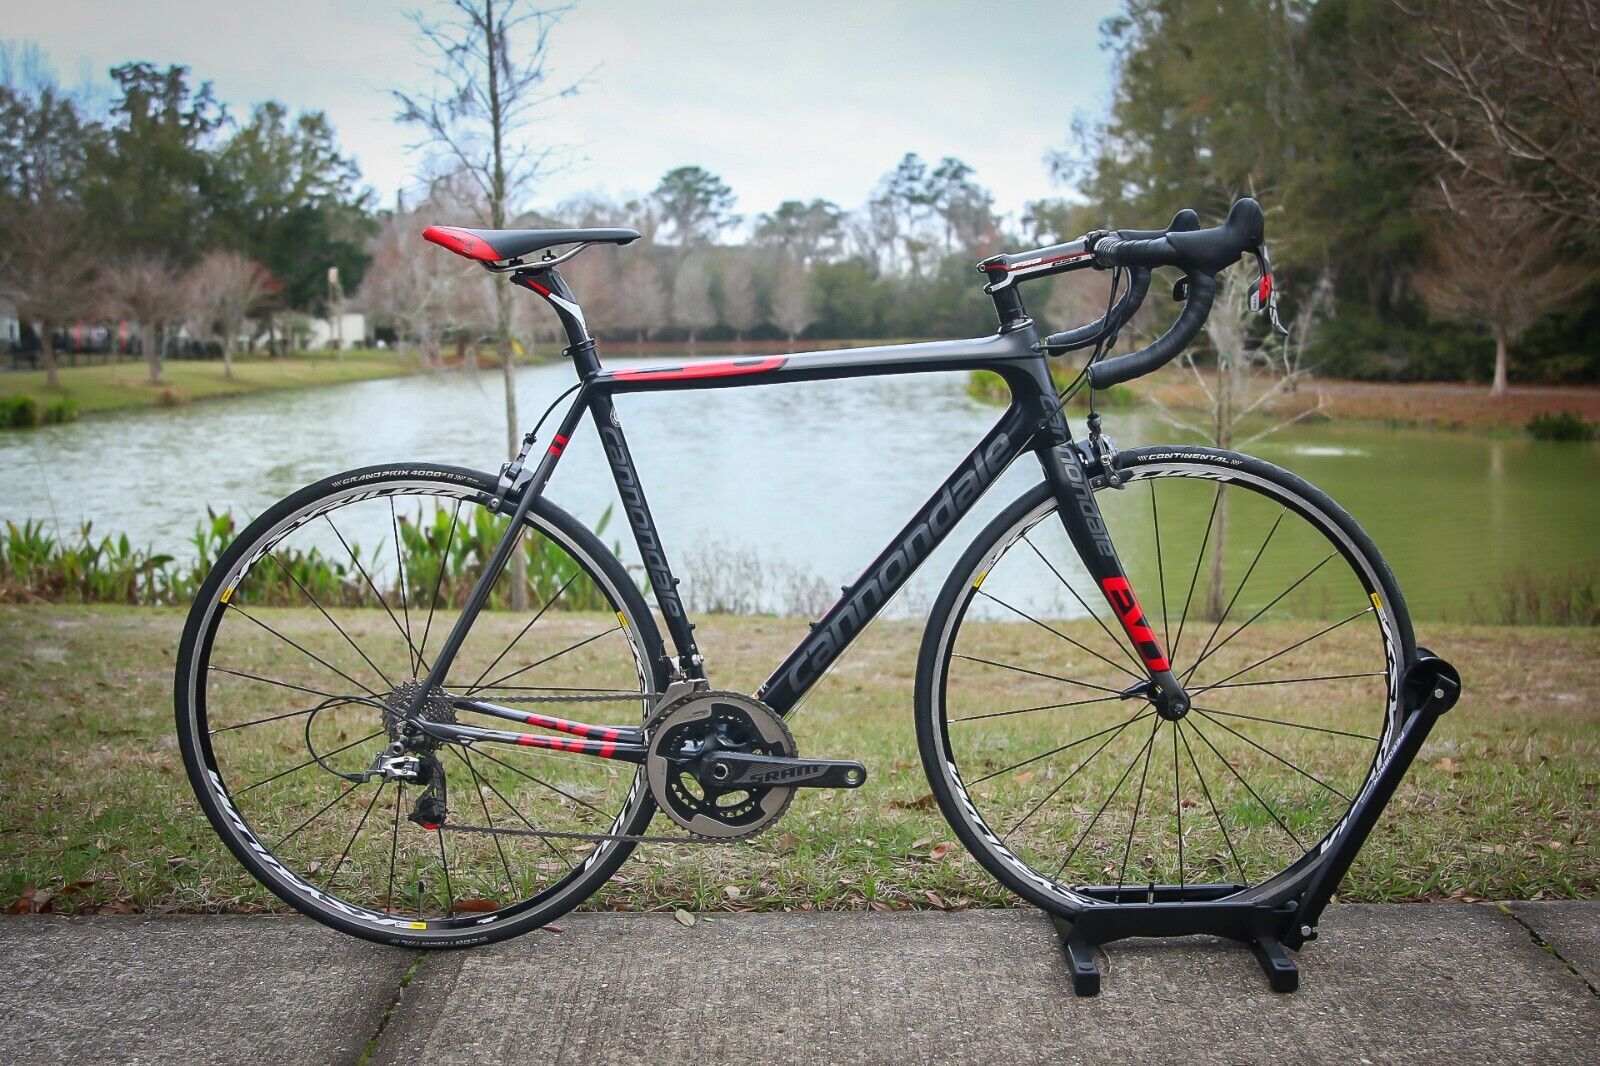 58 cm - 2013 Cannondale SuperSix Evo - Carbon - SRAM Red - 15lbs - INV 704